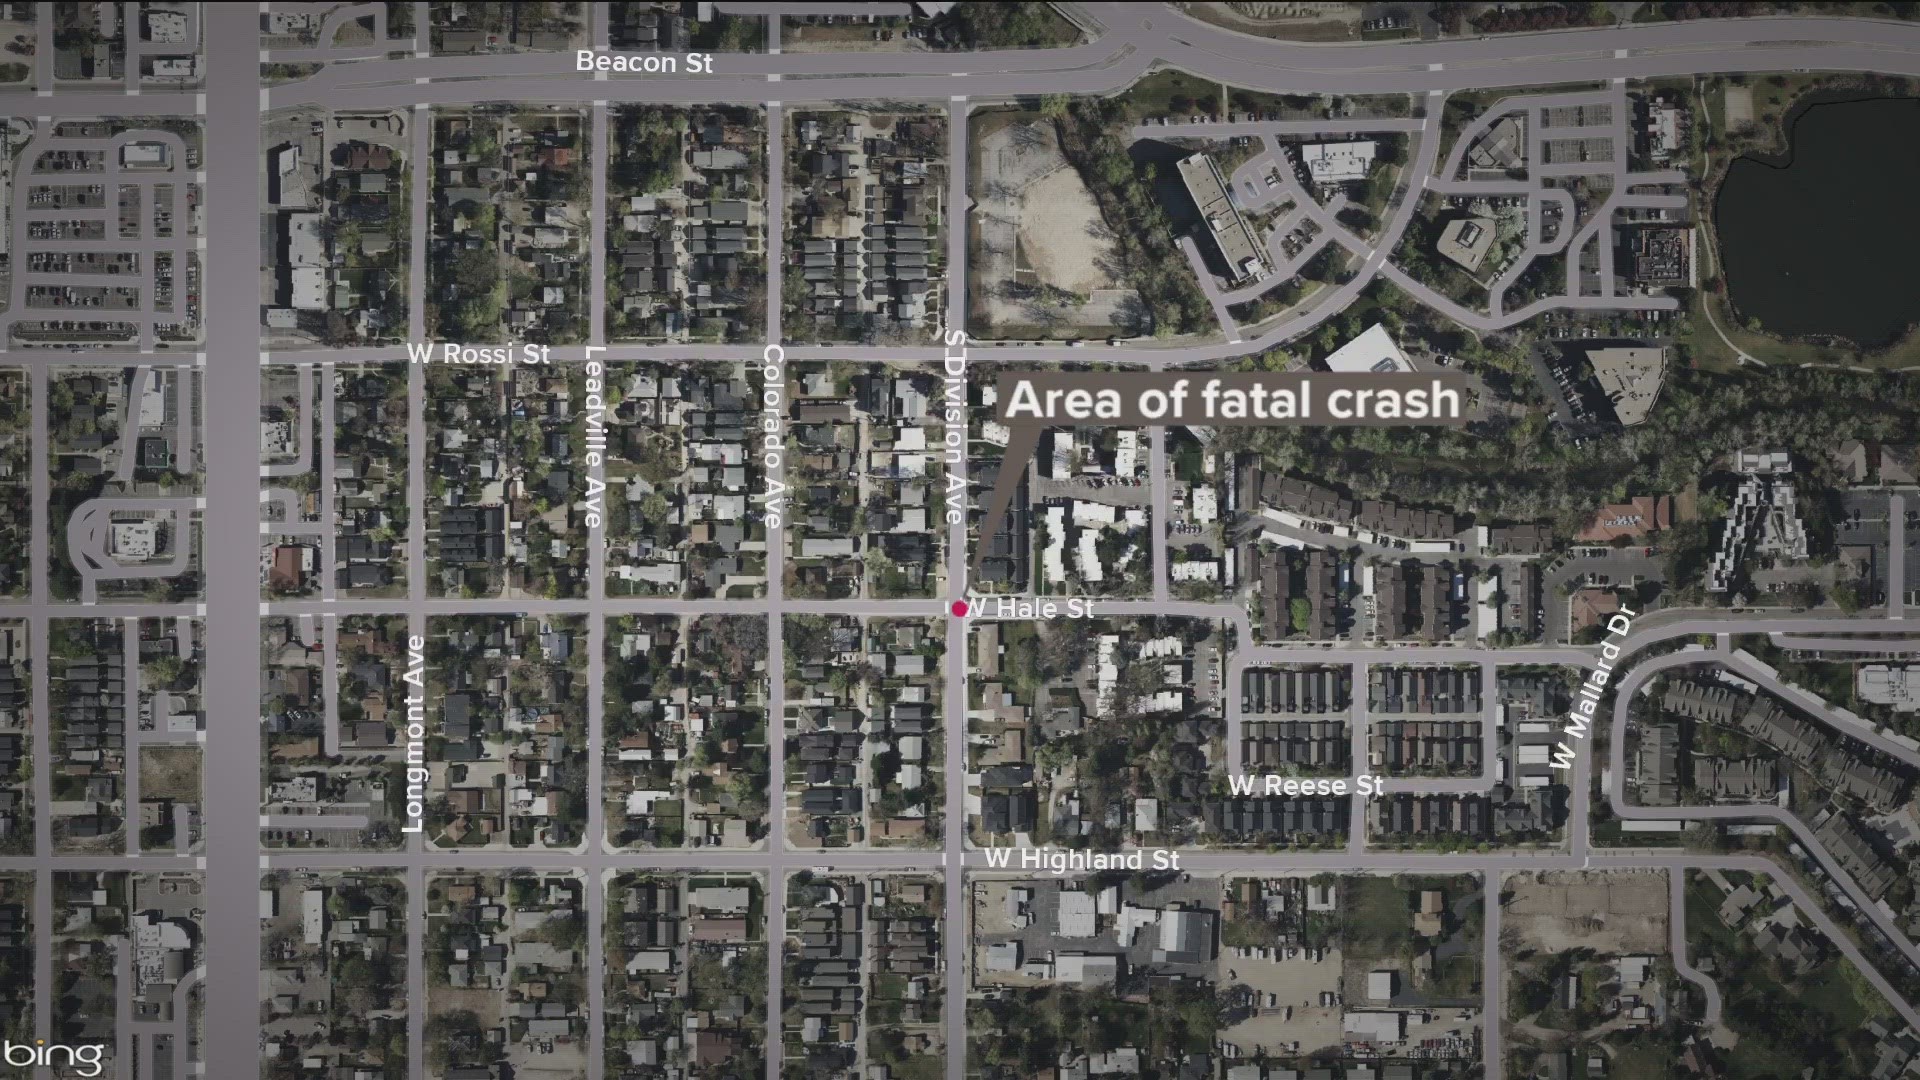 The Ada County Coroner's Office on Tuesday identified the victim of a fatal truck vs. electric motorcycle crash on April 11 as 47-year-old Tyson Twilegar of Boise.